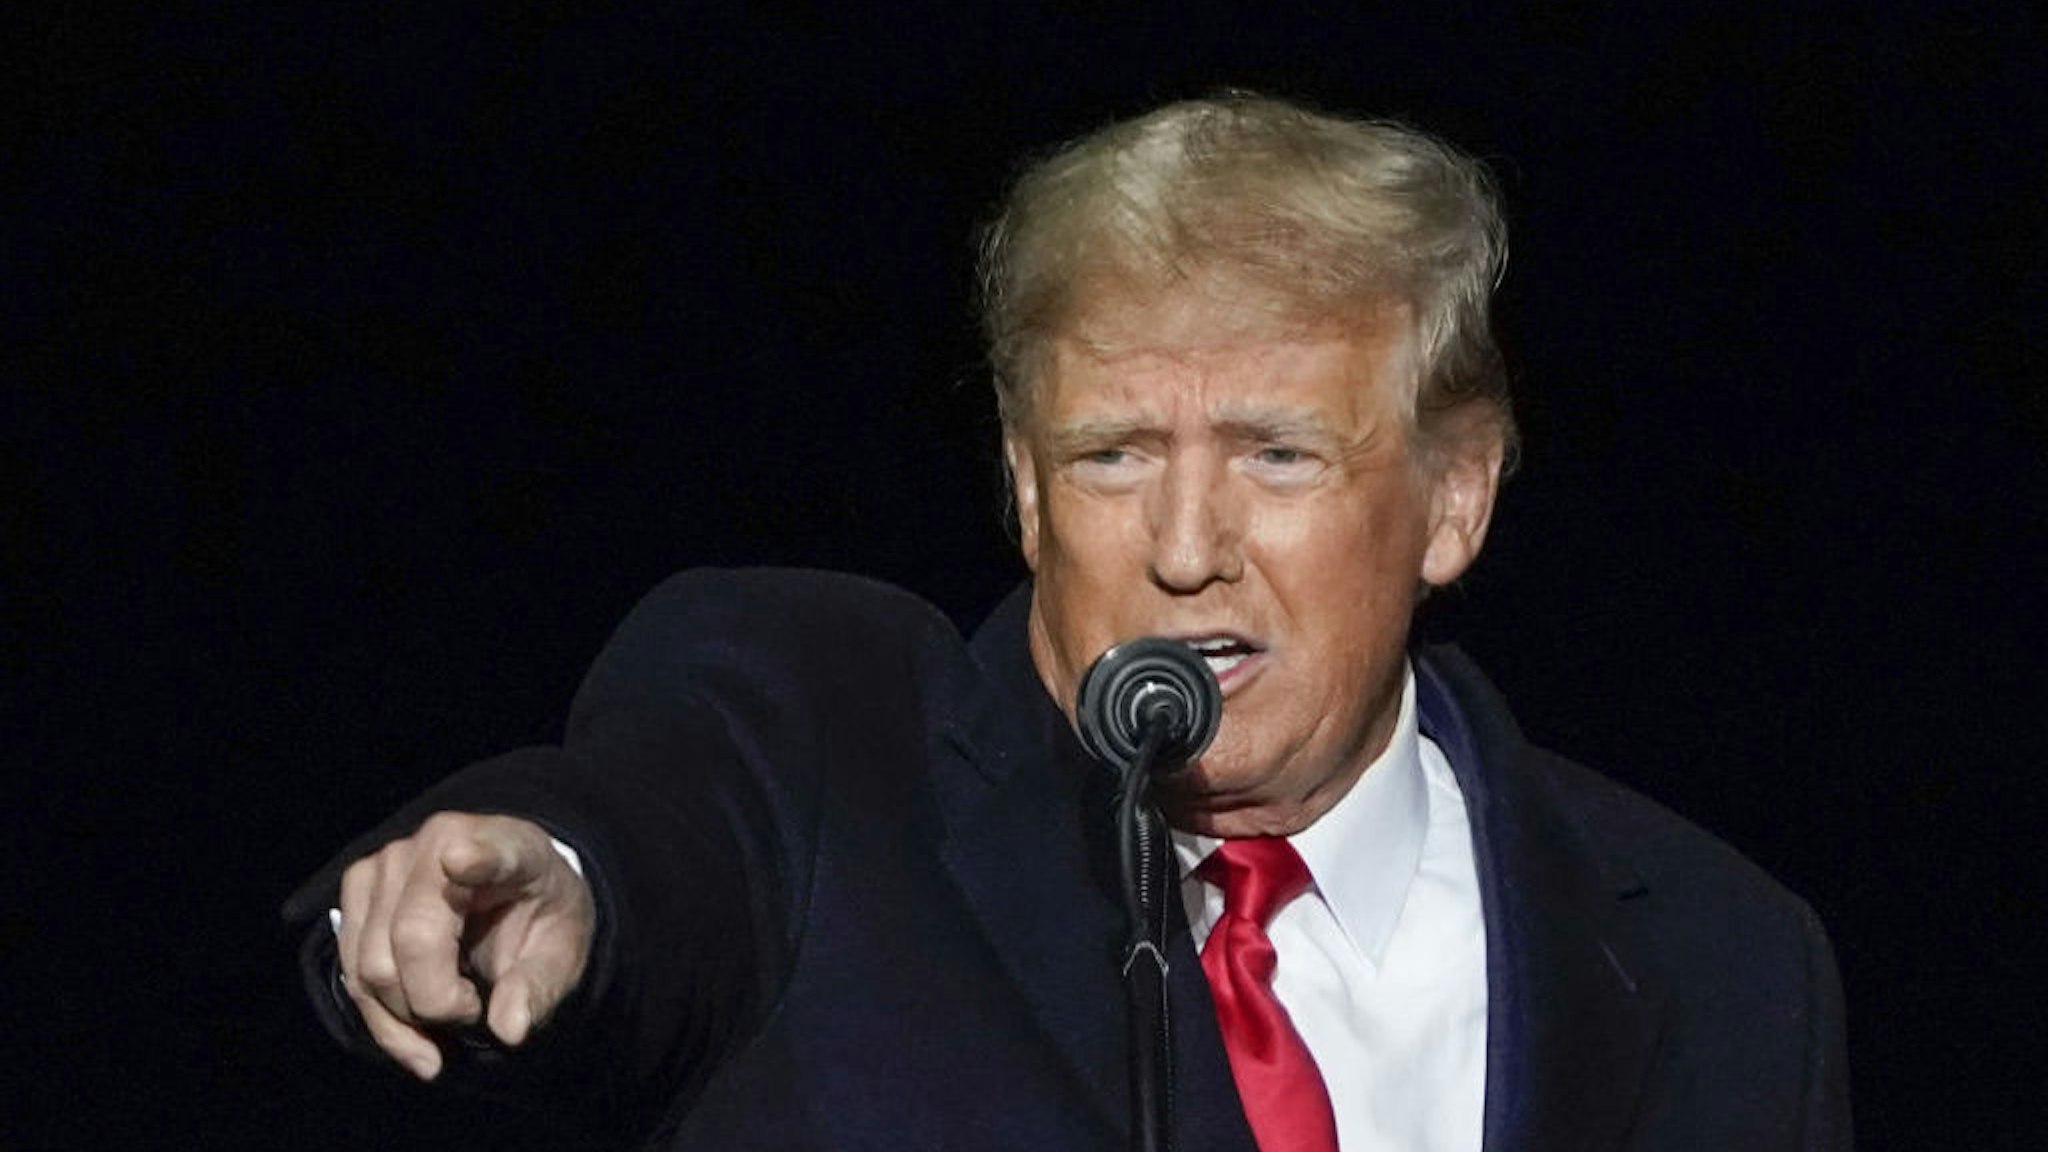 Former US President Donald Trump speaks during a 'Save America' rally in Vandalia, Ohio, US, on Monday, Nov. 7, 2022. Former President Donald Trump suggested an announcement that he plans to make another White House bid is imminent and attacked Florida Governor Ron DeSantis at a rally in Pennsylvania, a sign the former president is training his ire on a potential chief rival in a 2024 GOP primary. Photographer: Joshua A. Bickel/Bloomberg